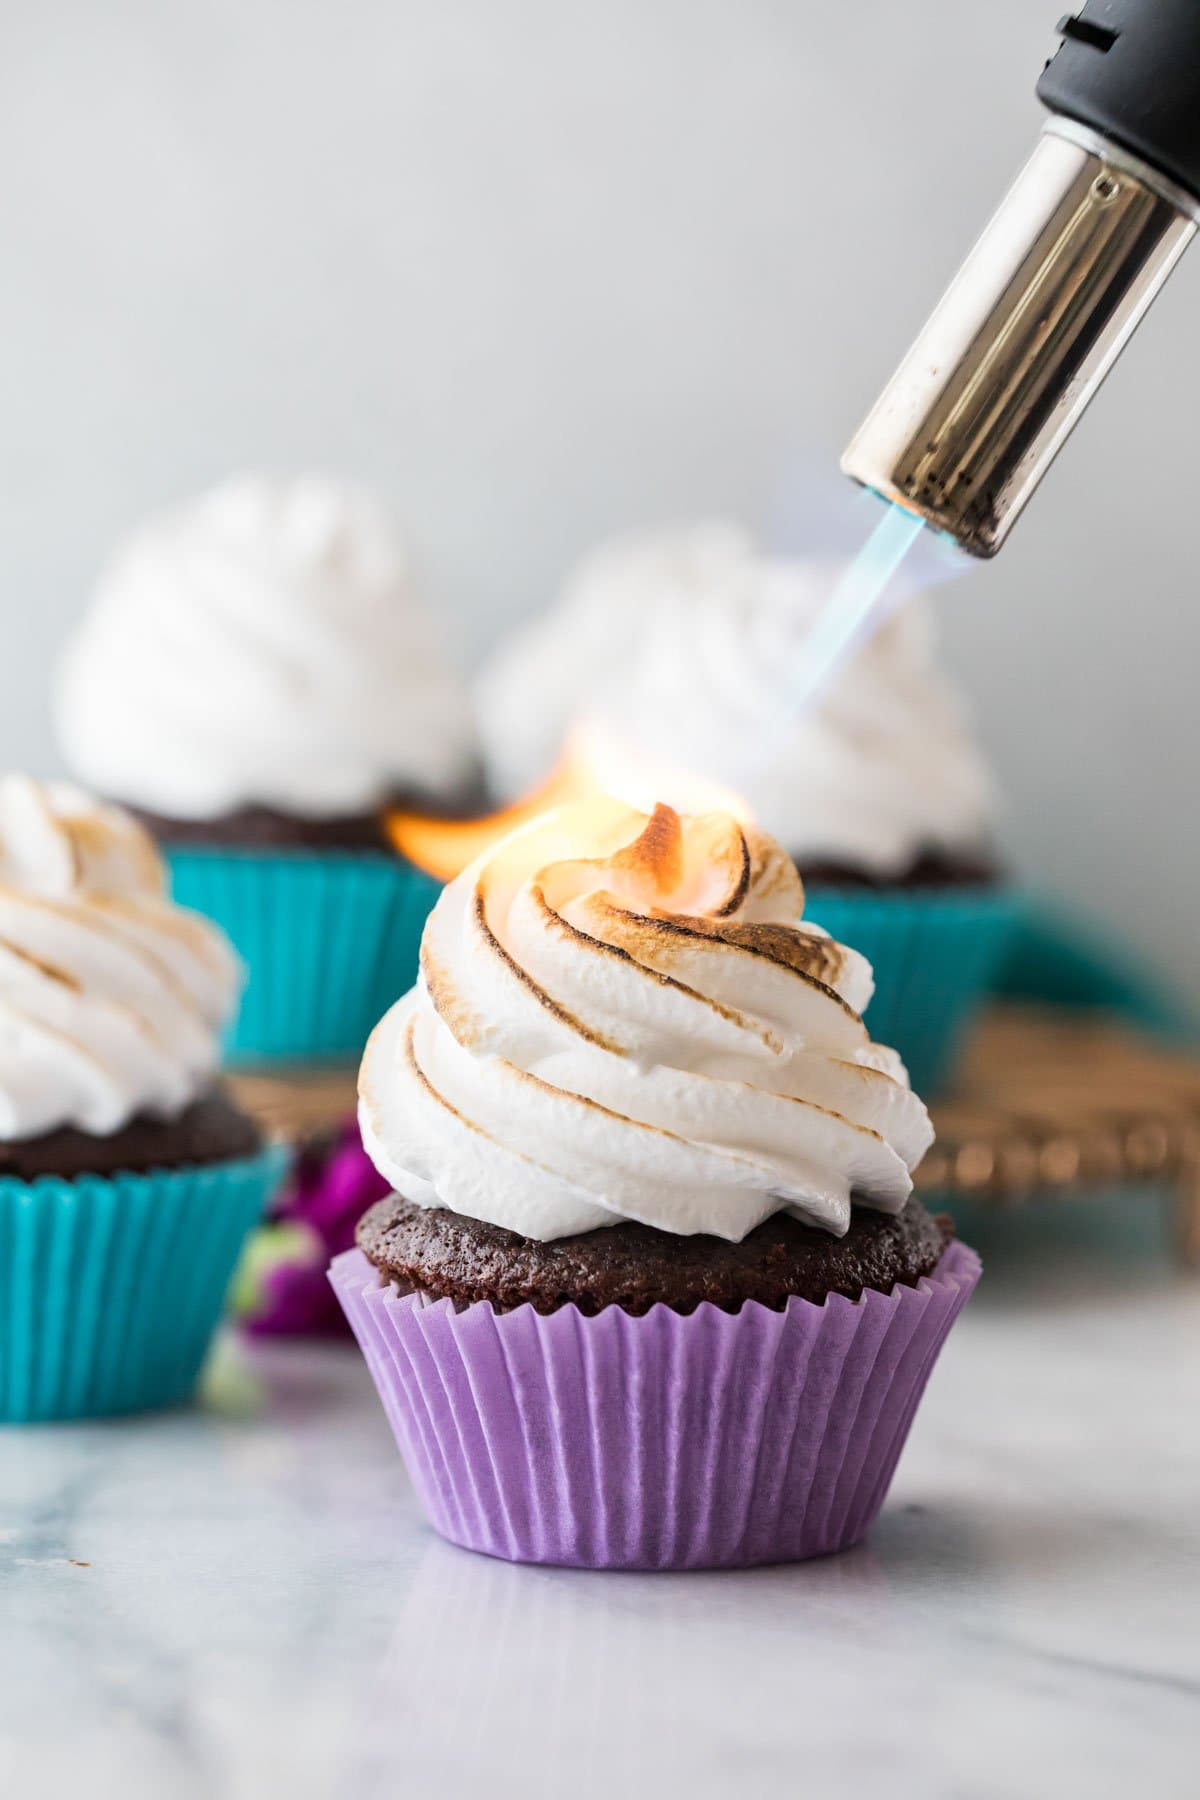 culinary torch toasting a marshmallow frosting swirl on top of a chocolate cupcake